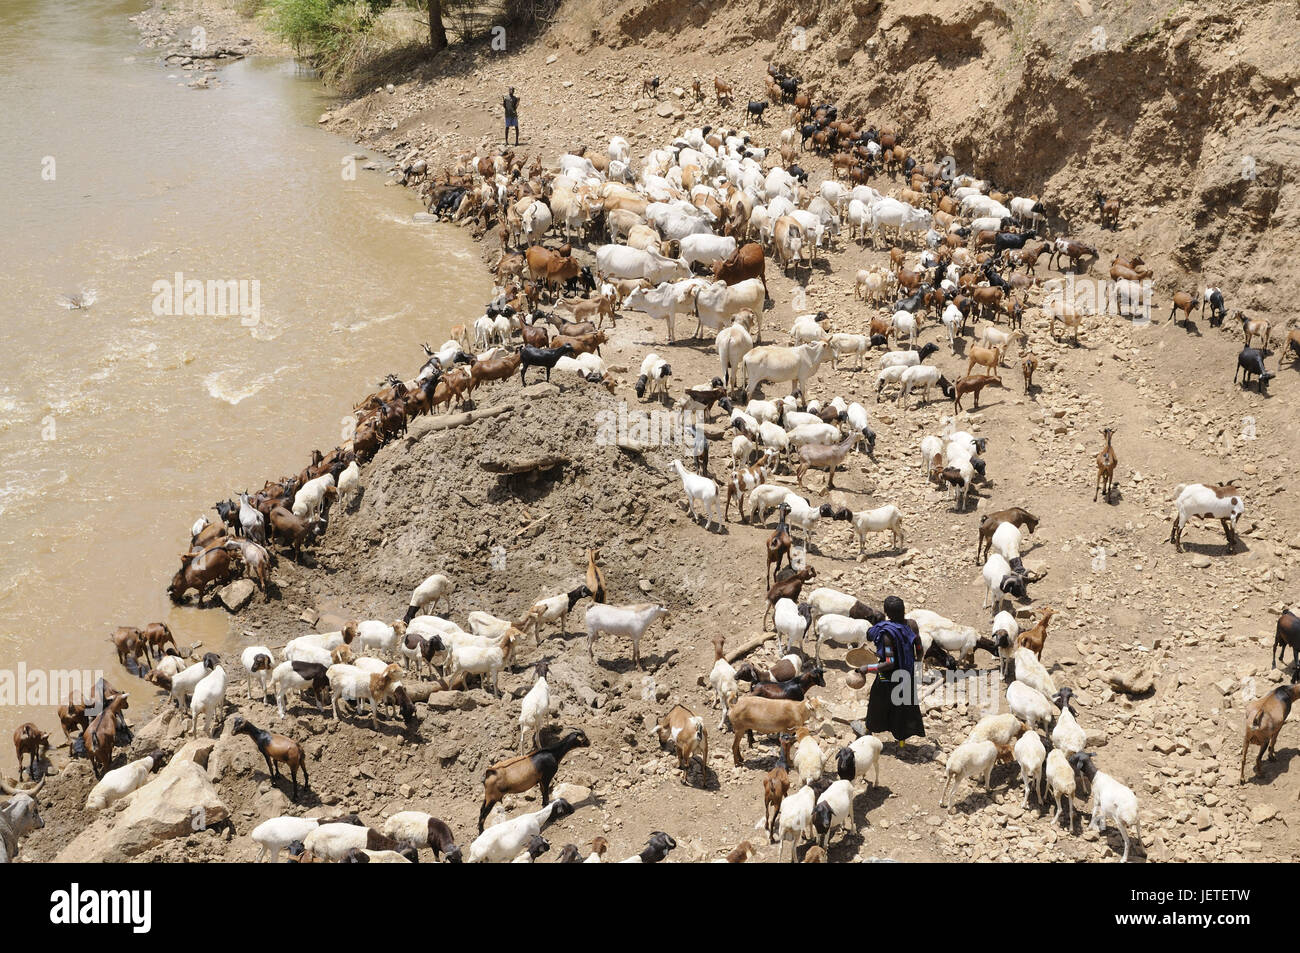 Goats, herd of cattle, river, water drinks, Omotal, Ethiopia, Stock Photo